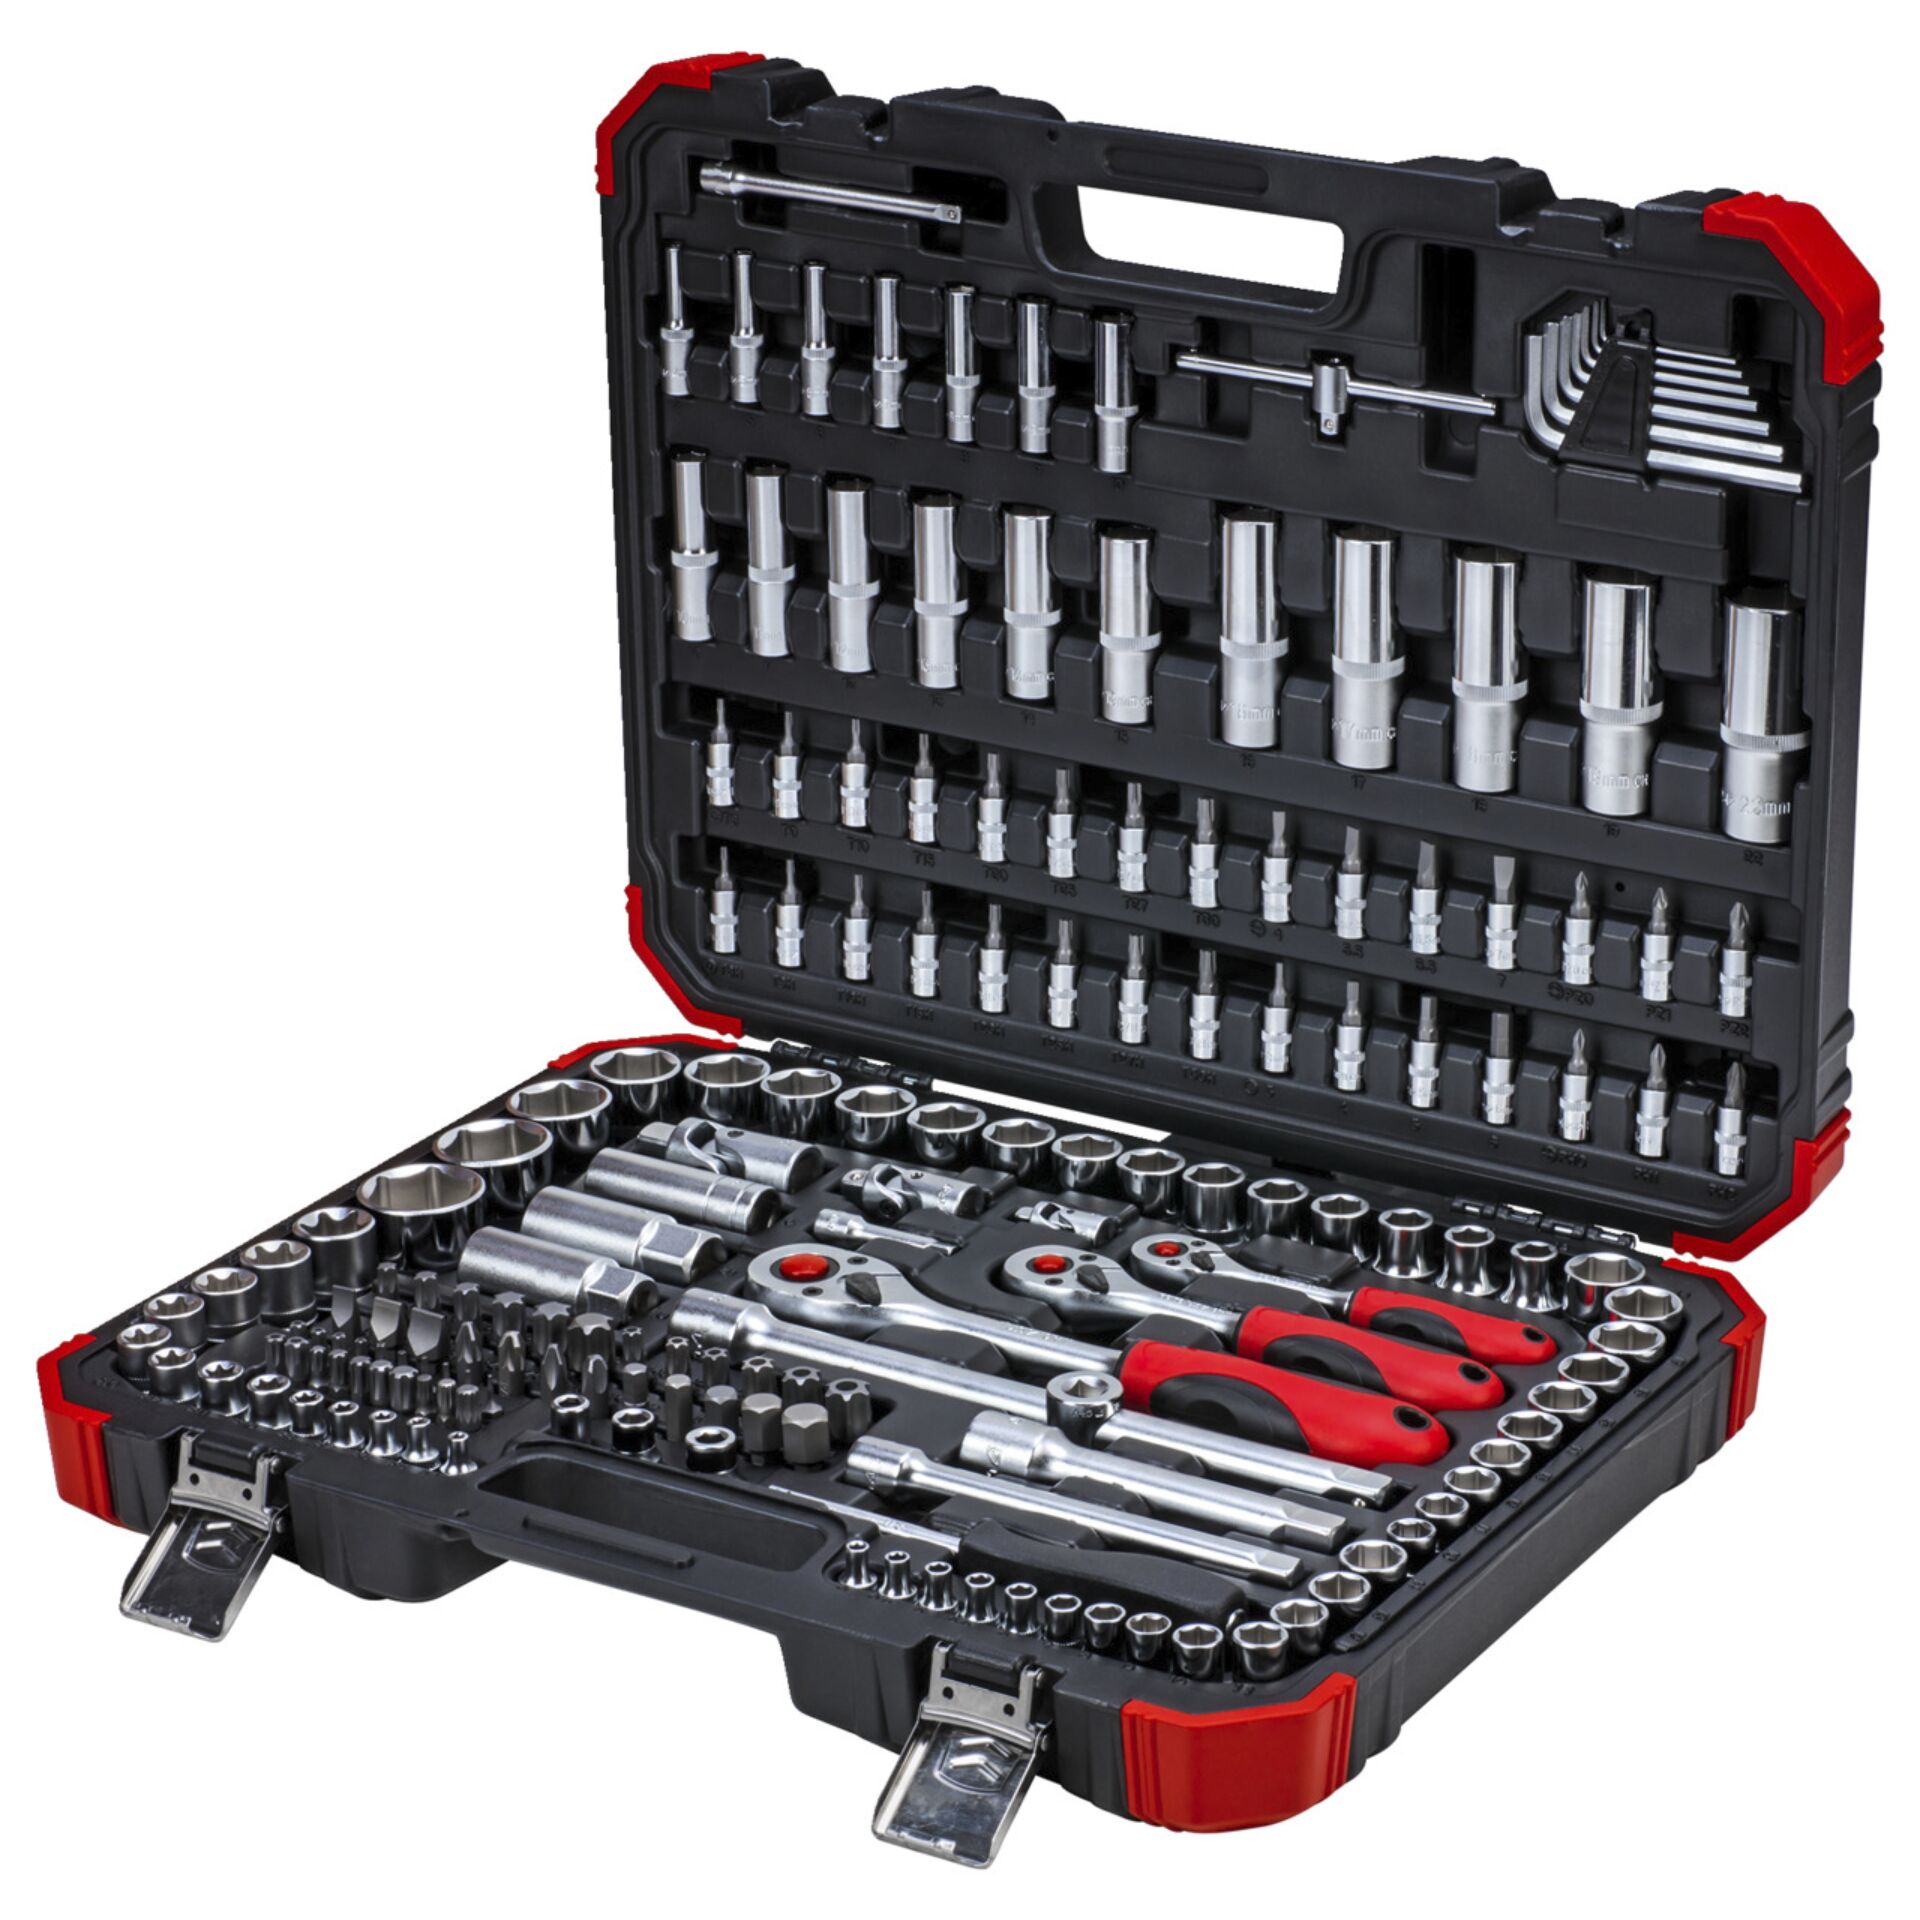 GEDORE red Socket Set 1/4  + 3/8  + 1/2  172-pieces